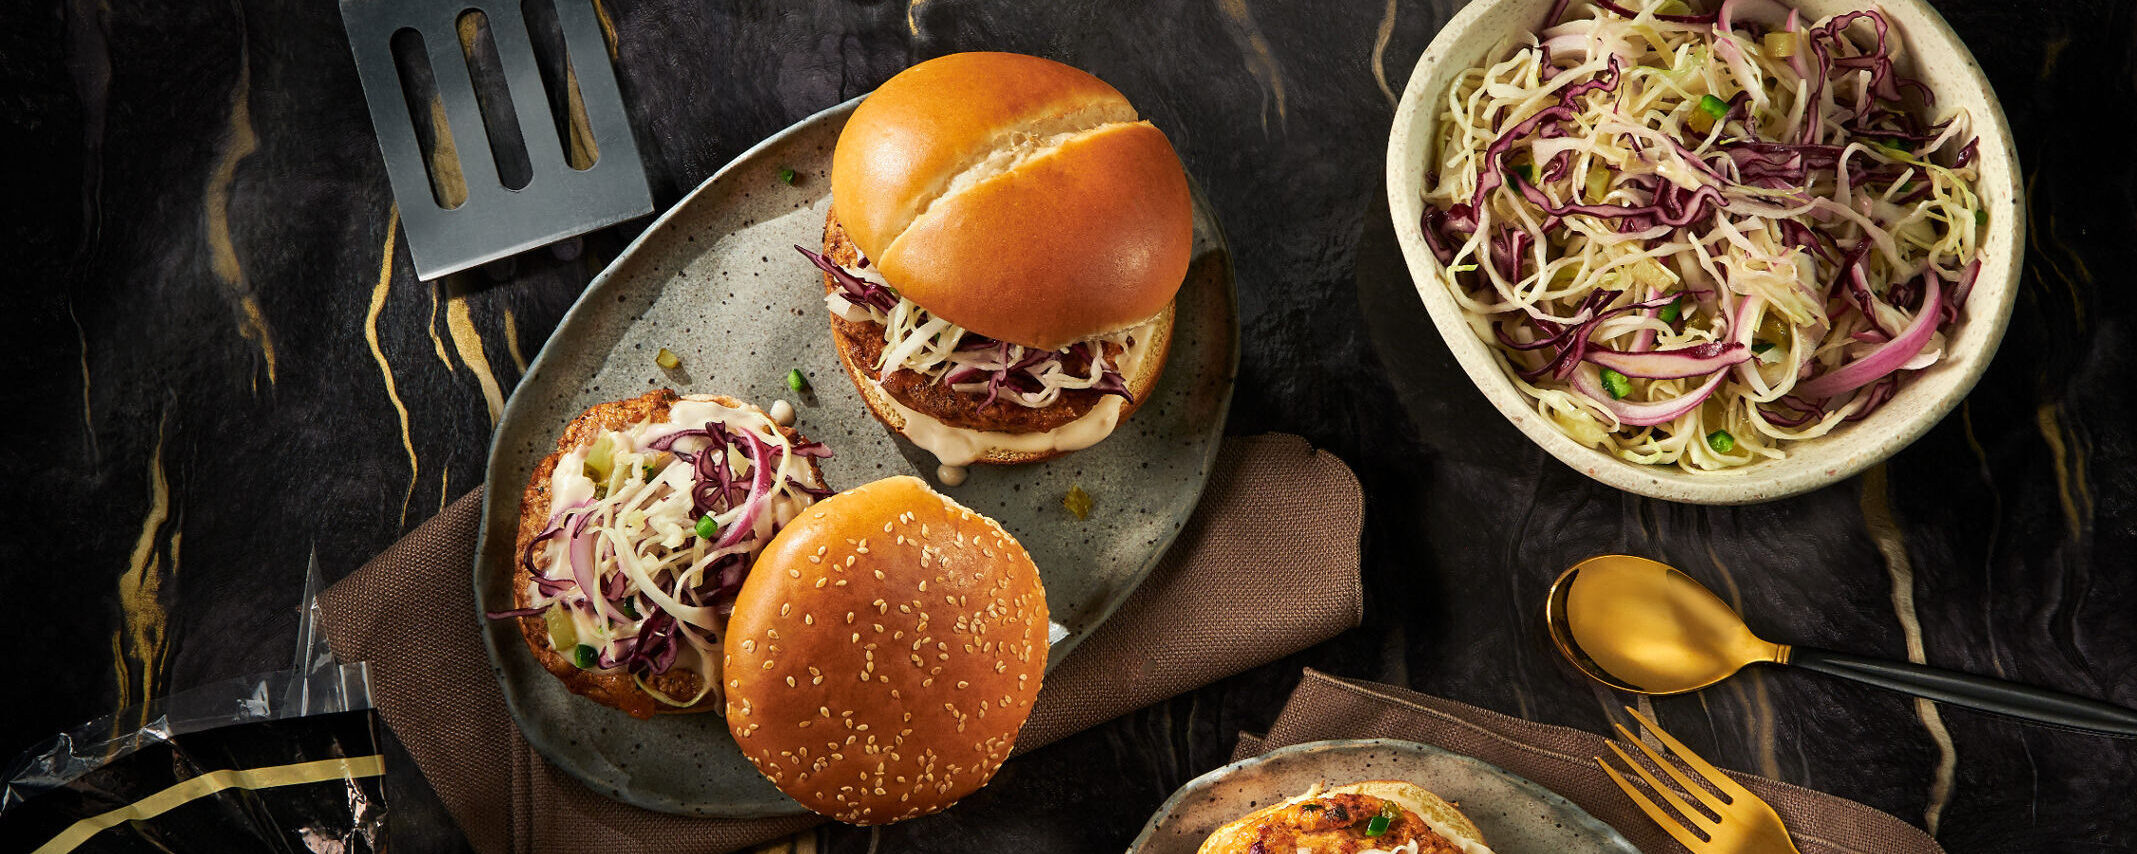 Chicken Burger with Slaw